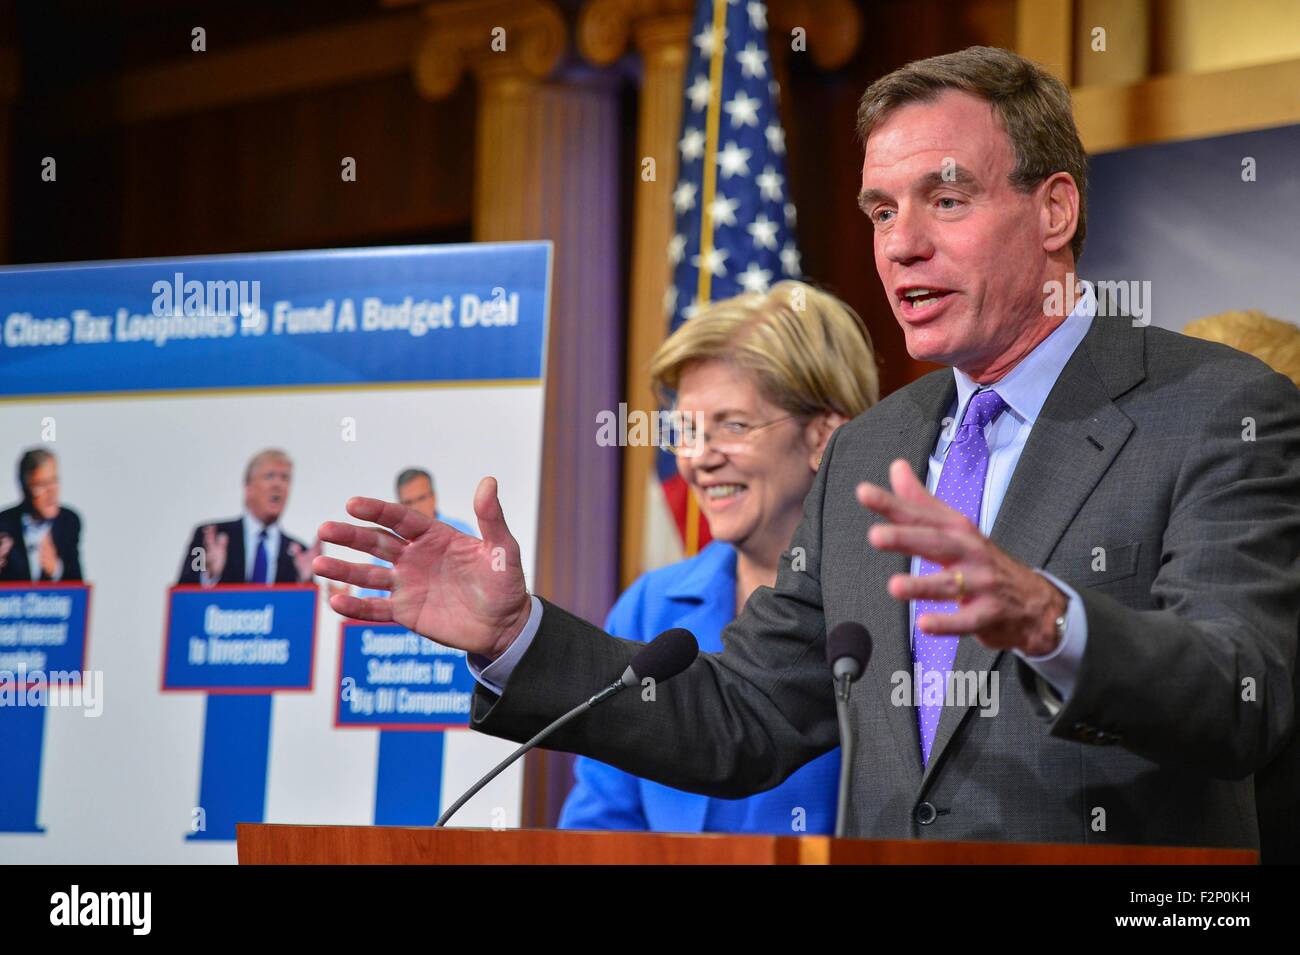 U.S. Senator Mark Warner joins other democrats during a press conference calling for Republicans to support tax loophole closures to help finance a budget agreement on Capitol Hill September 17, 2015 in Washington, DC. Stock Photo